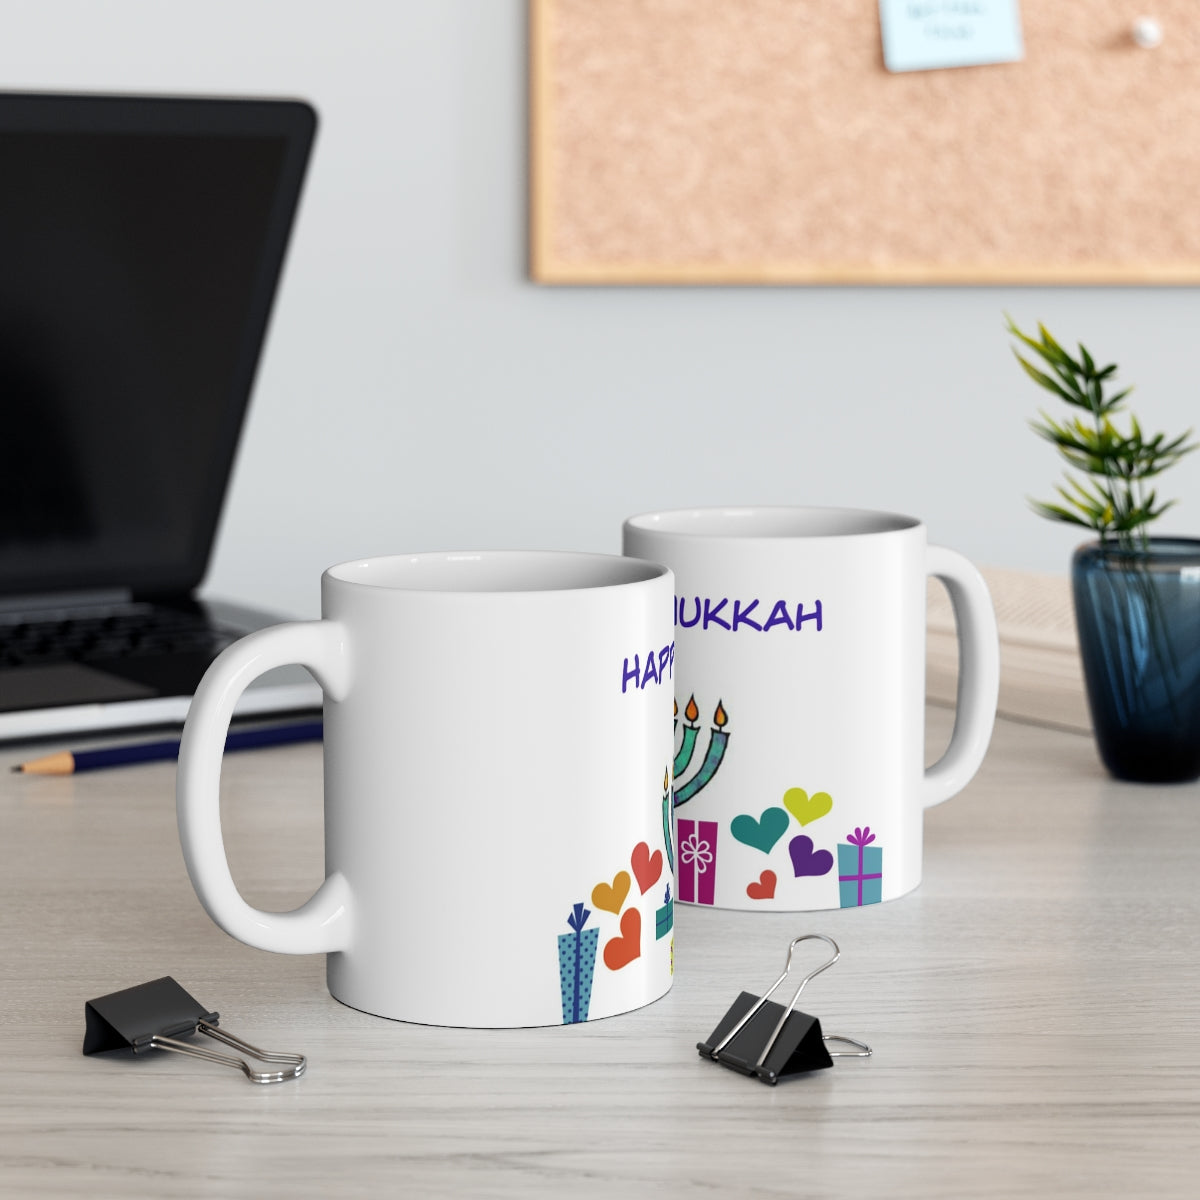 Mock up of 2 mugs on a surface with a lap top computer in the background